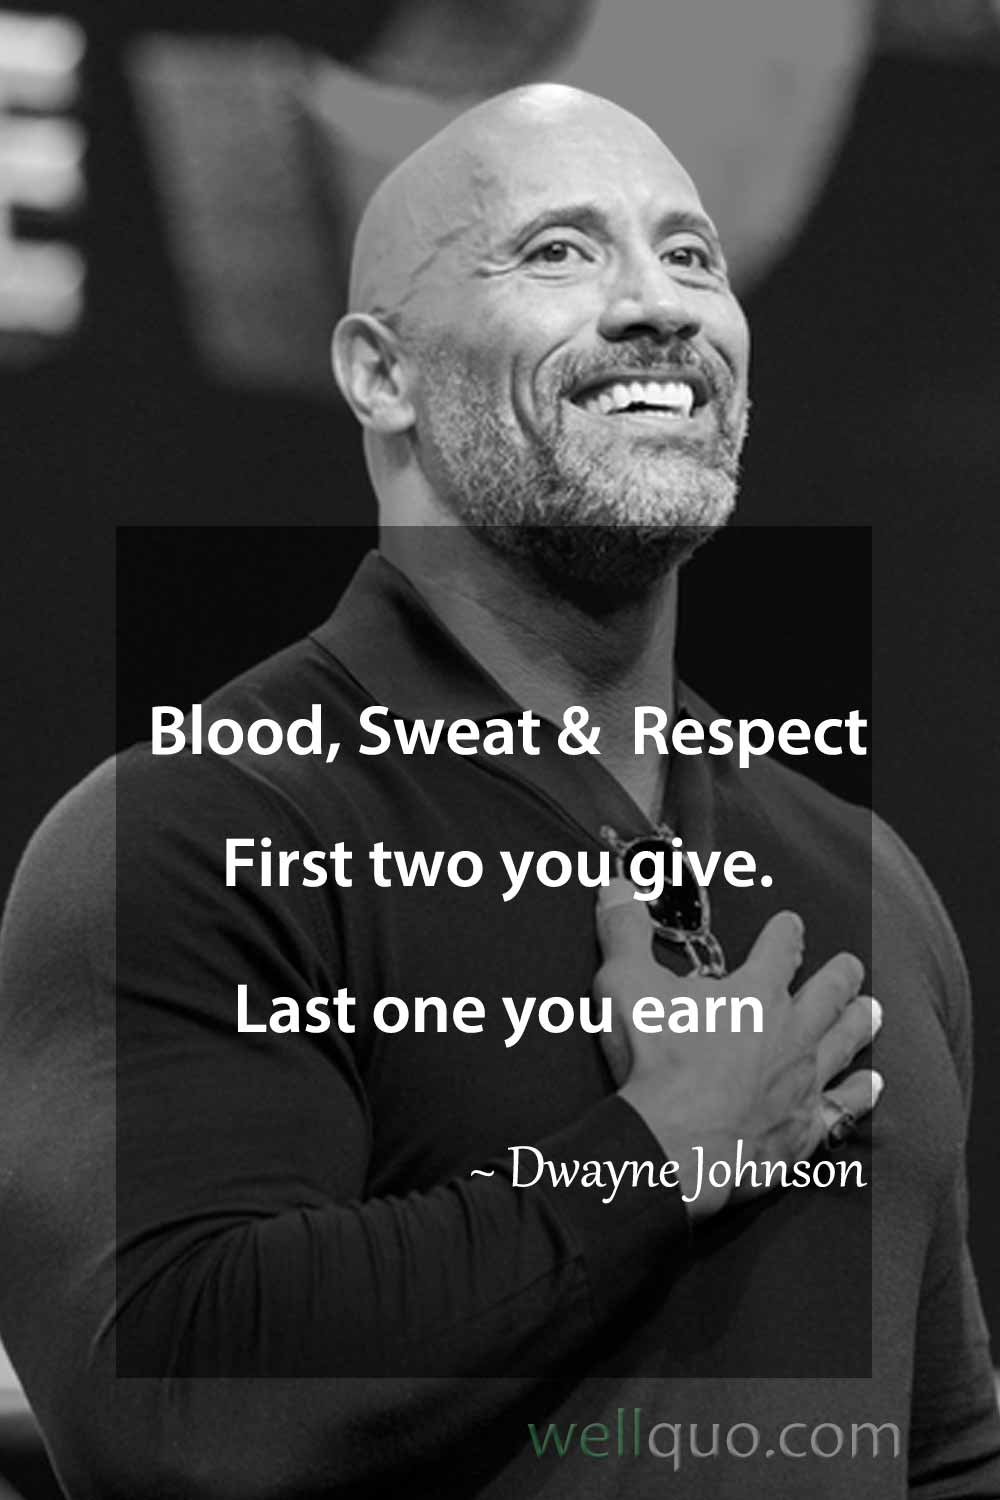 Fitness Quotes & Workout Quotes To Get Motivated - Well Quo